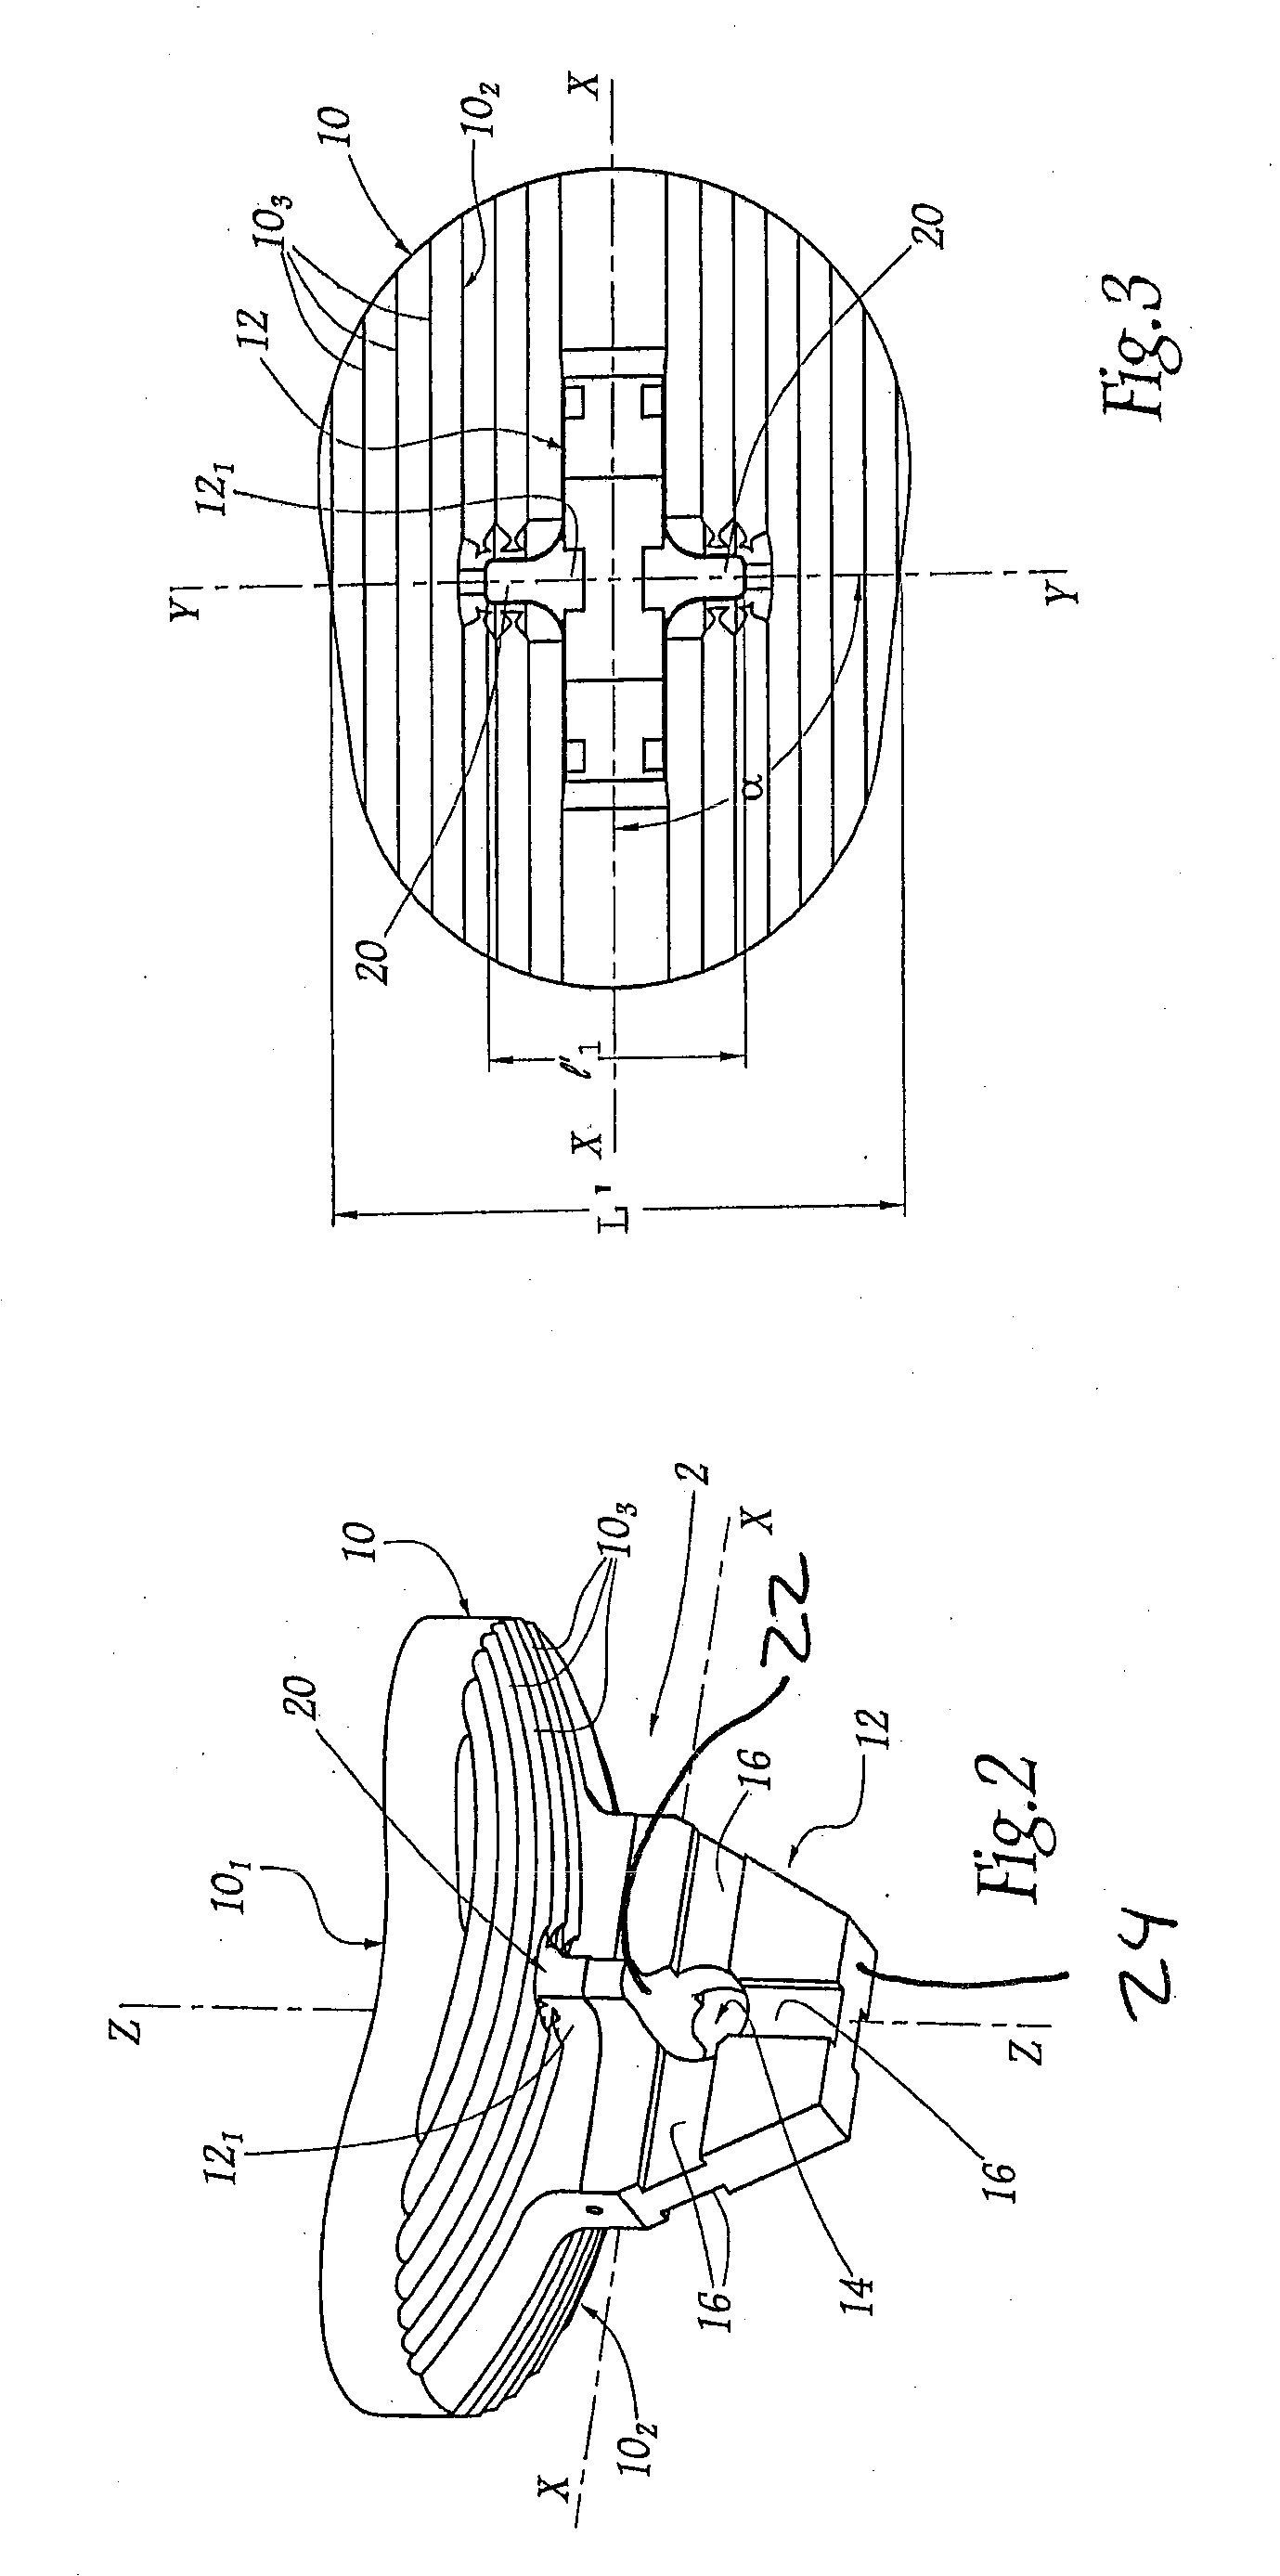 Glenoid component with an anatomically optimized keel